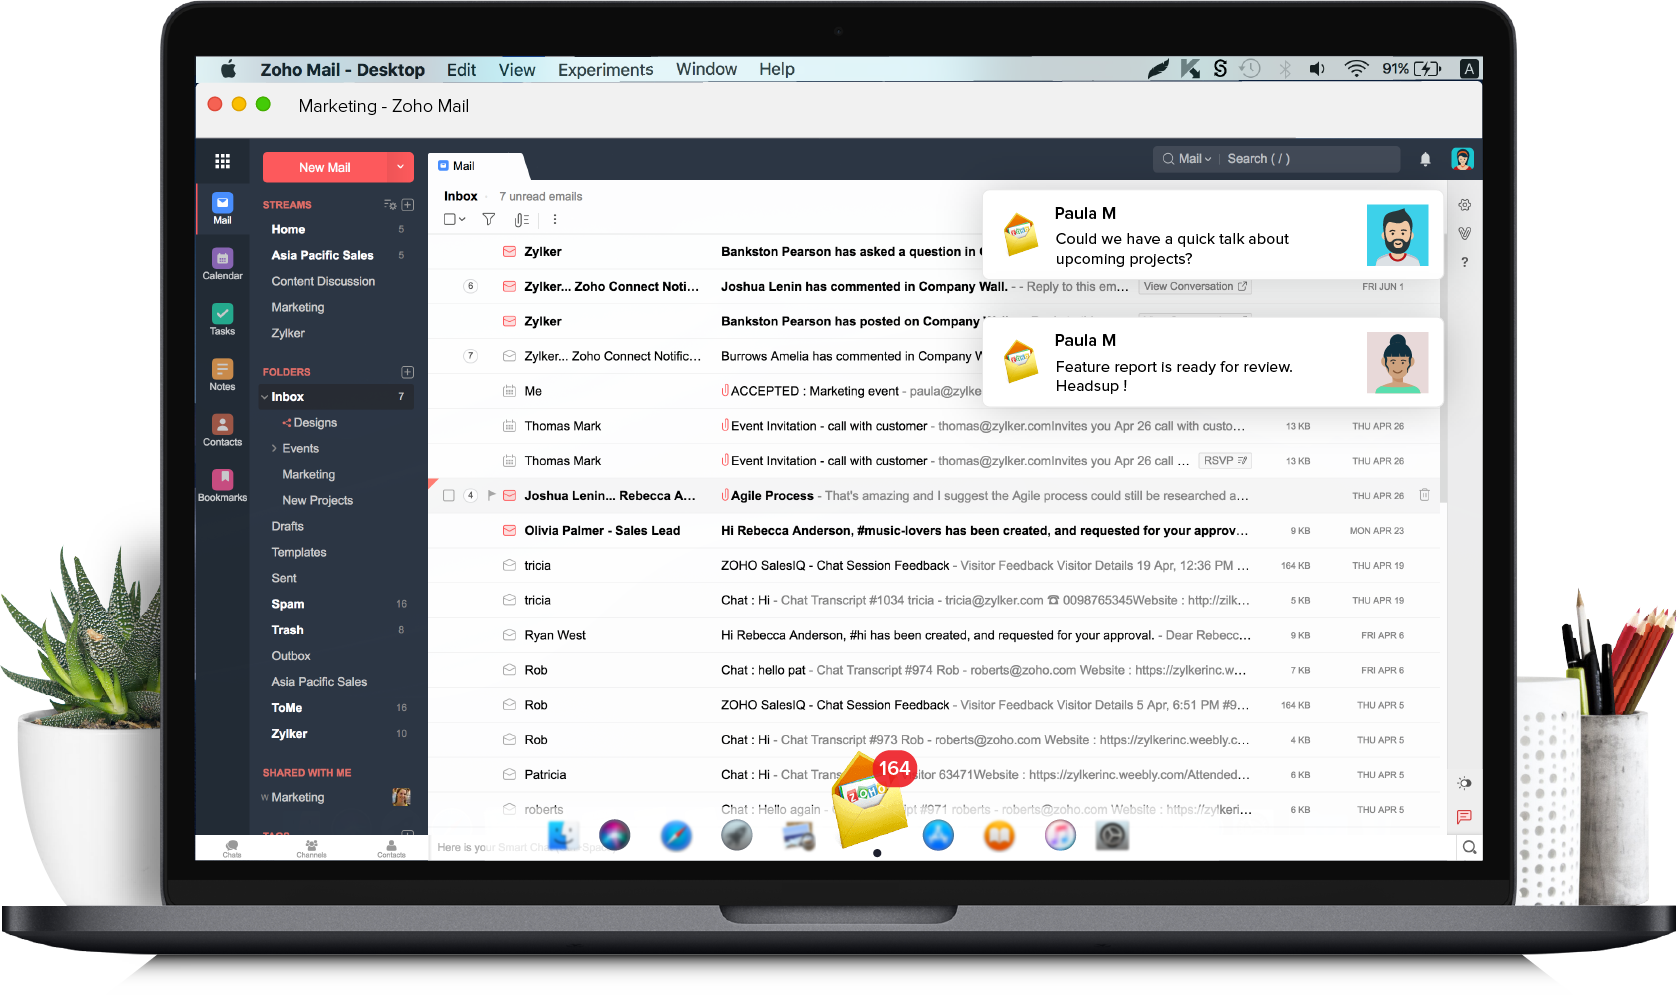 Calendar, Tasks, Notes, Bookmarks, and Contacts from your mailbox in Zoho Mail